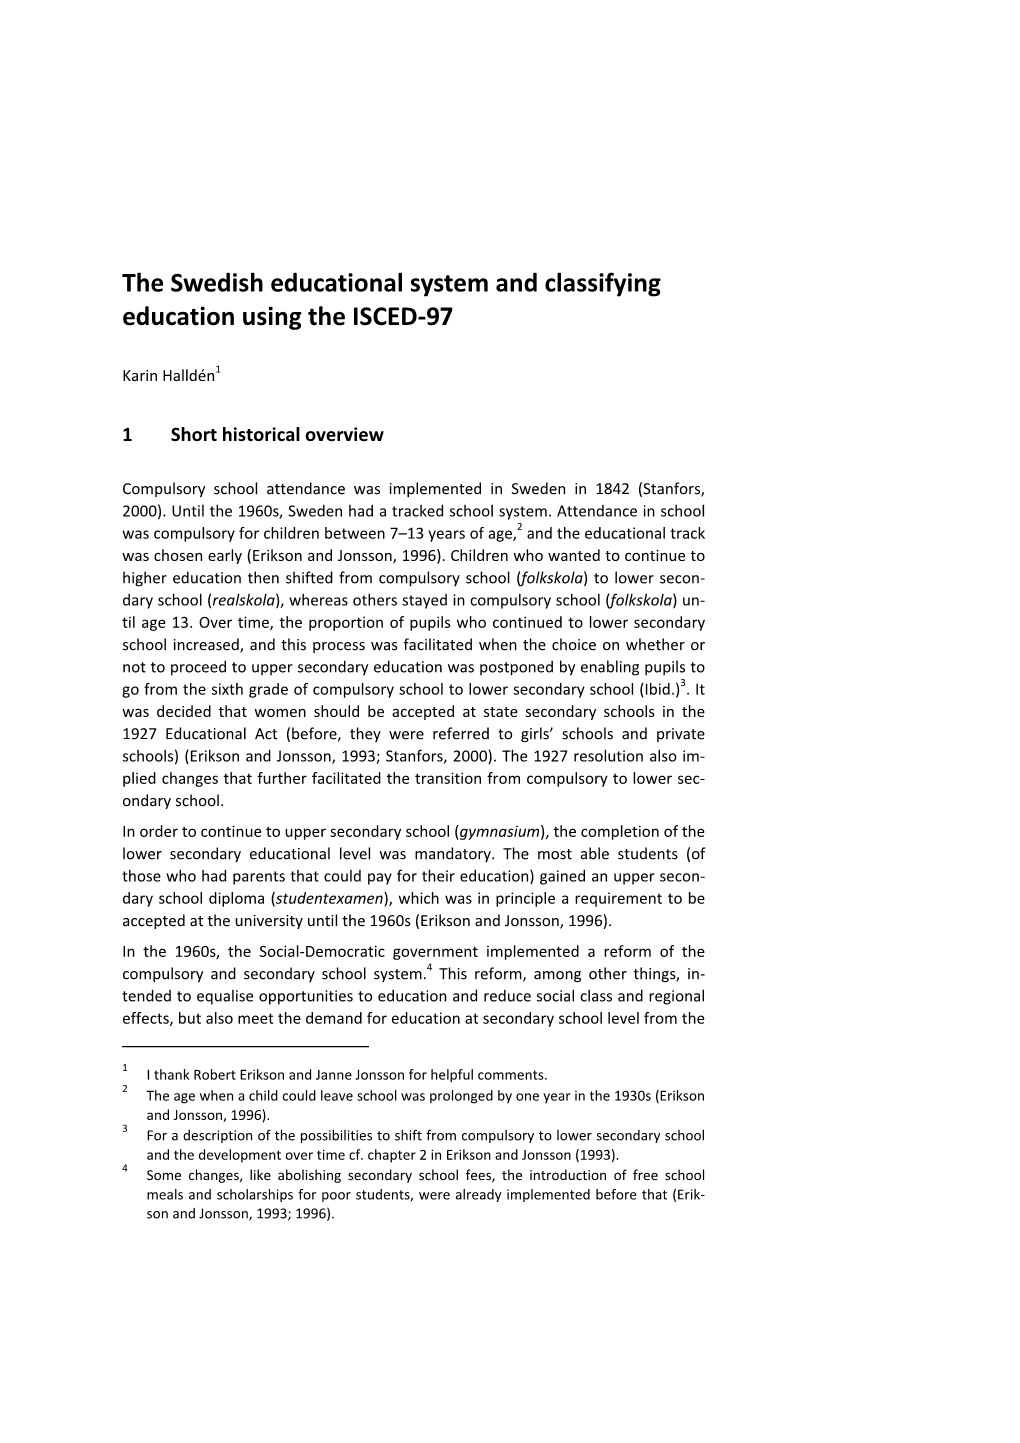 The Swedish Educational System and Classifying Education Using the ISCED‐97